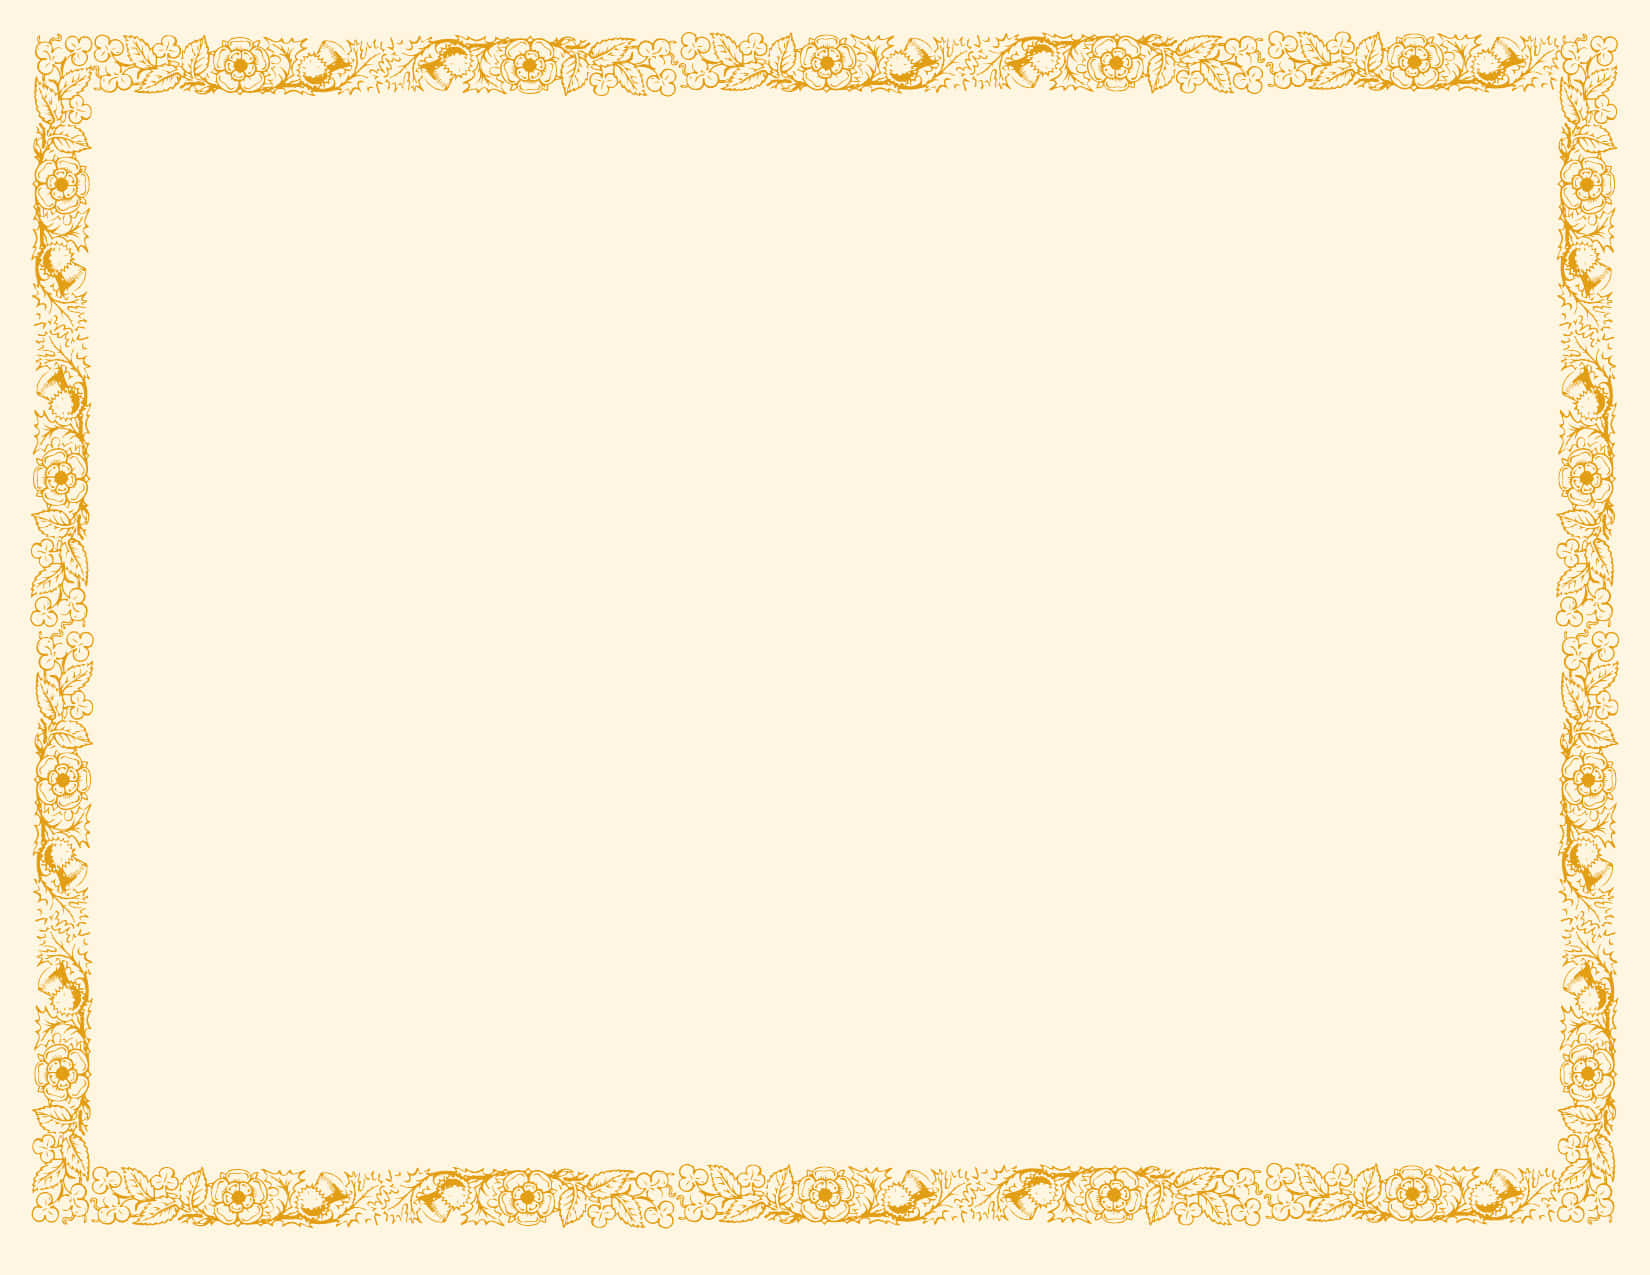 A Gold Certificate Frame With A Border